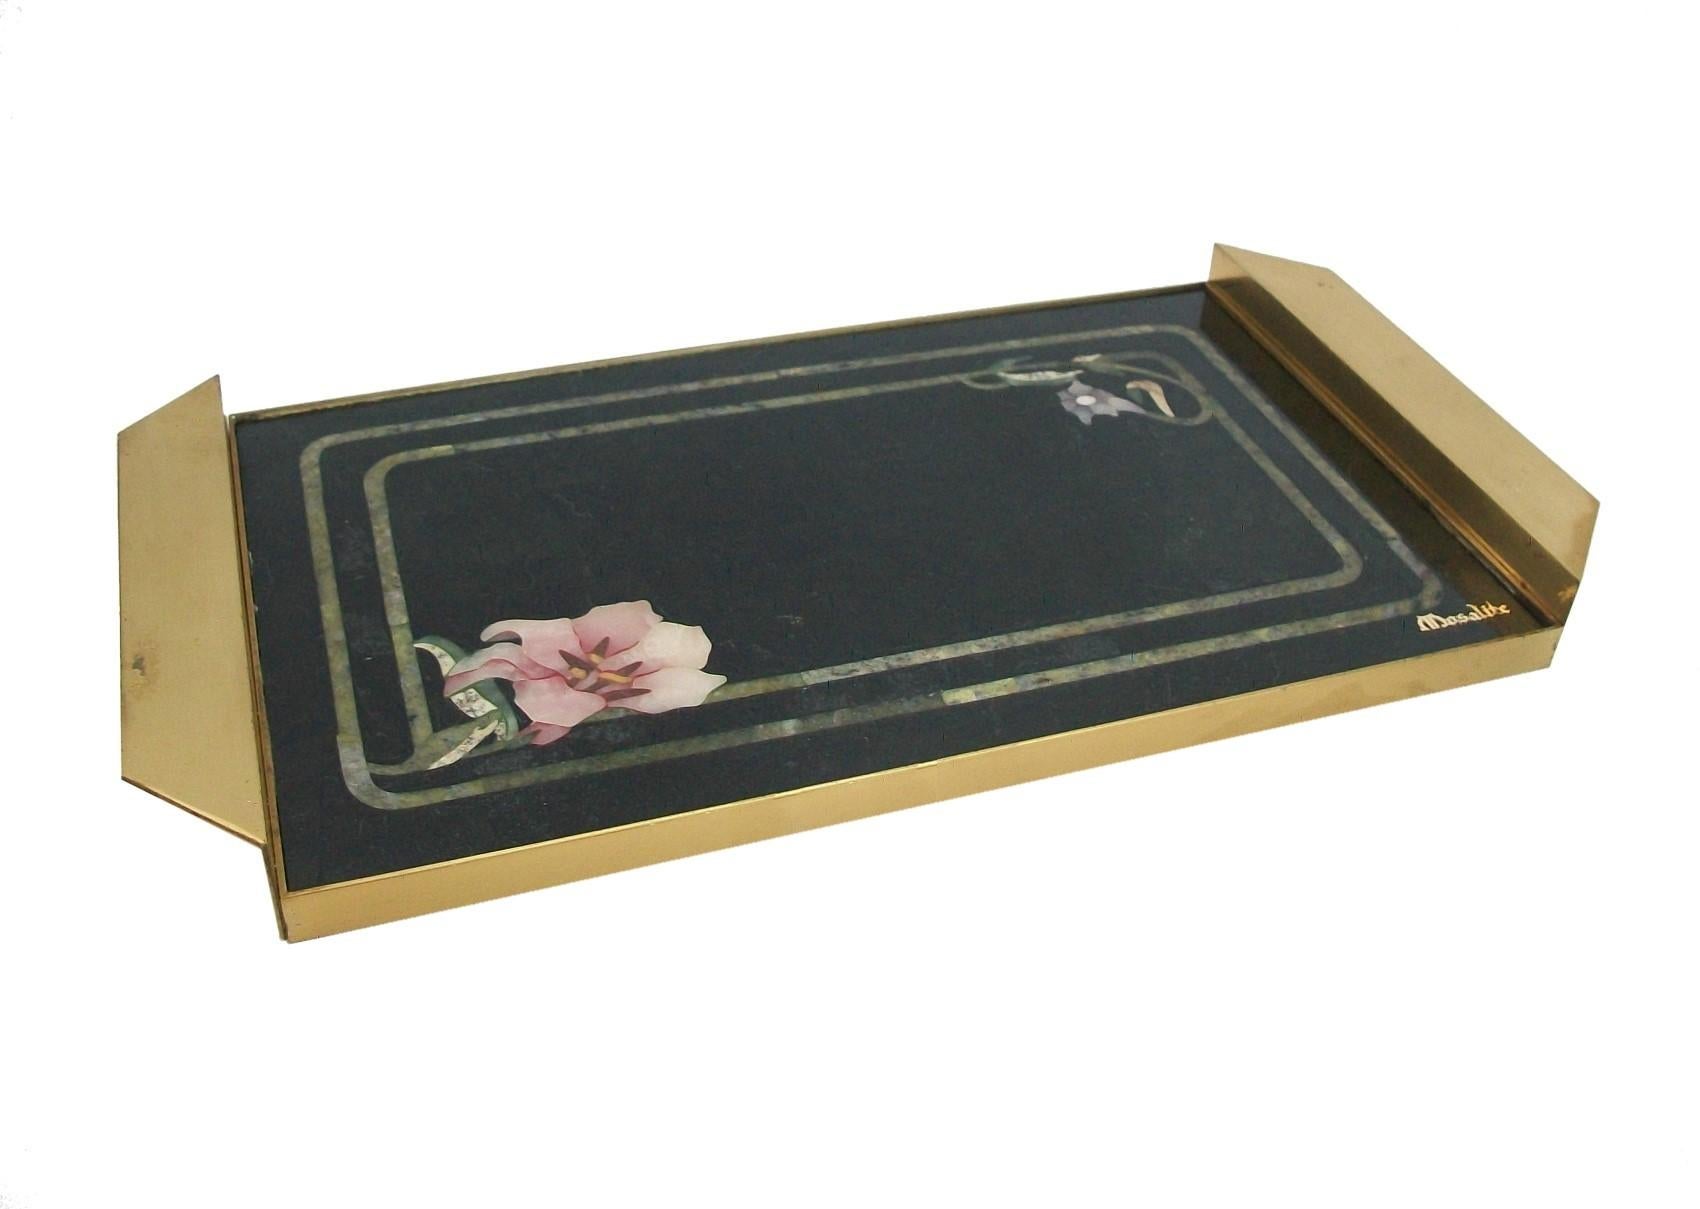 MOSALITE - Fine quality and rare vintage Pietra Dura and brass tray - featuring pink and lavender floral marble inlays to two corners intertwined with a double inset green marble border with black marble background - twin handles and trim in brass -